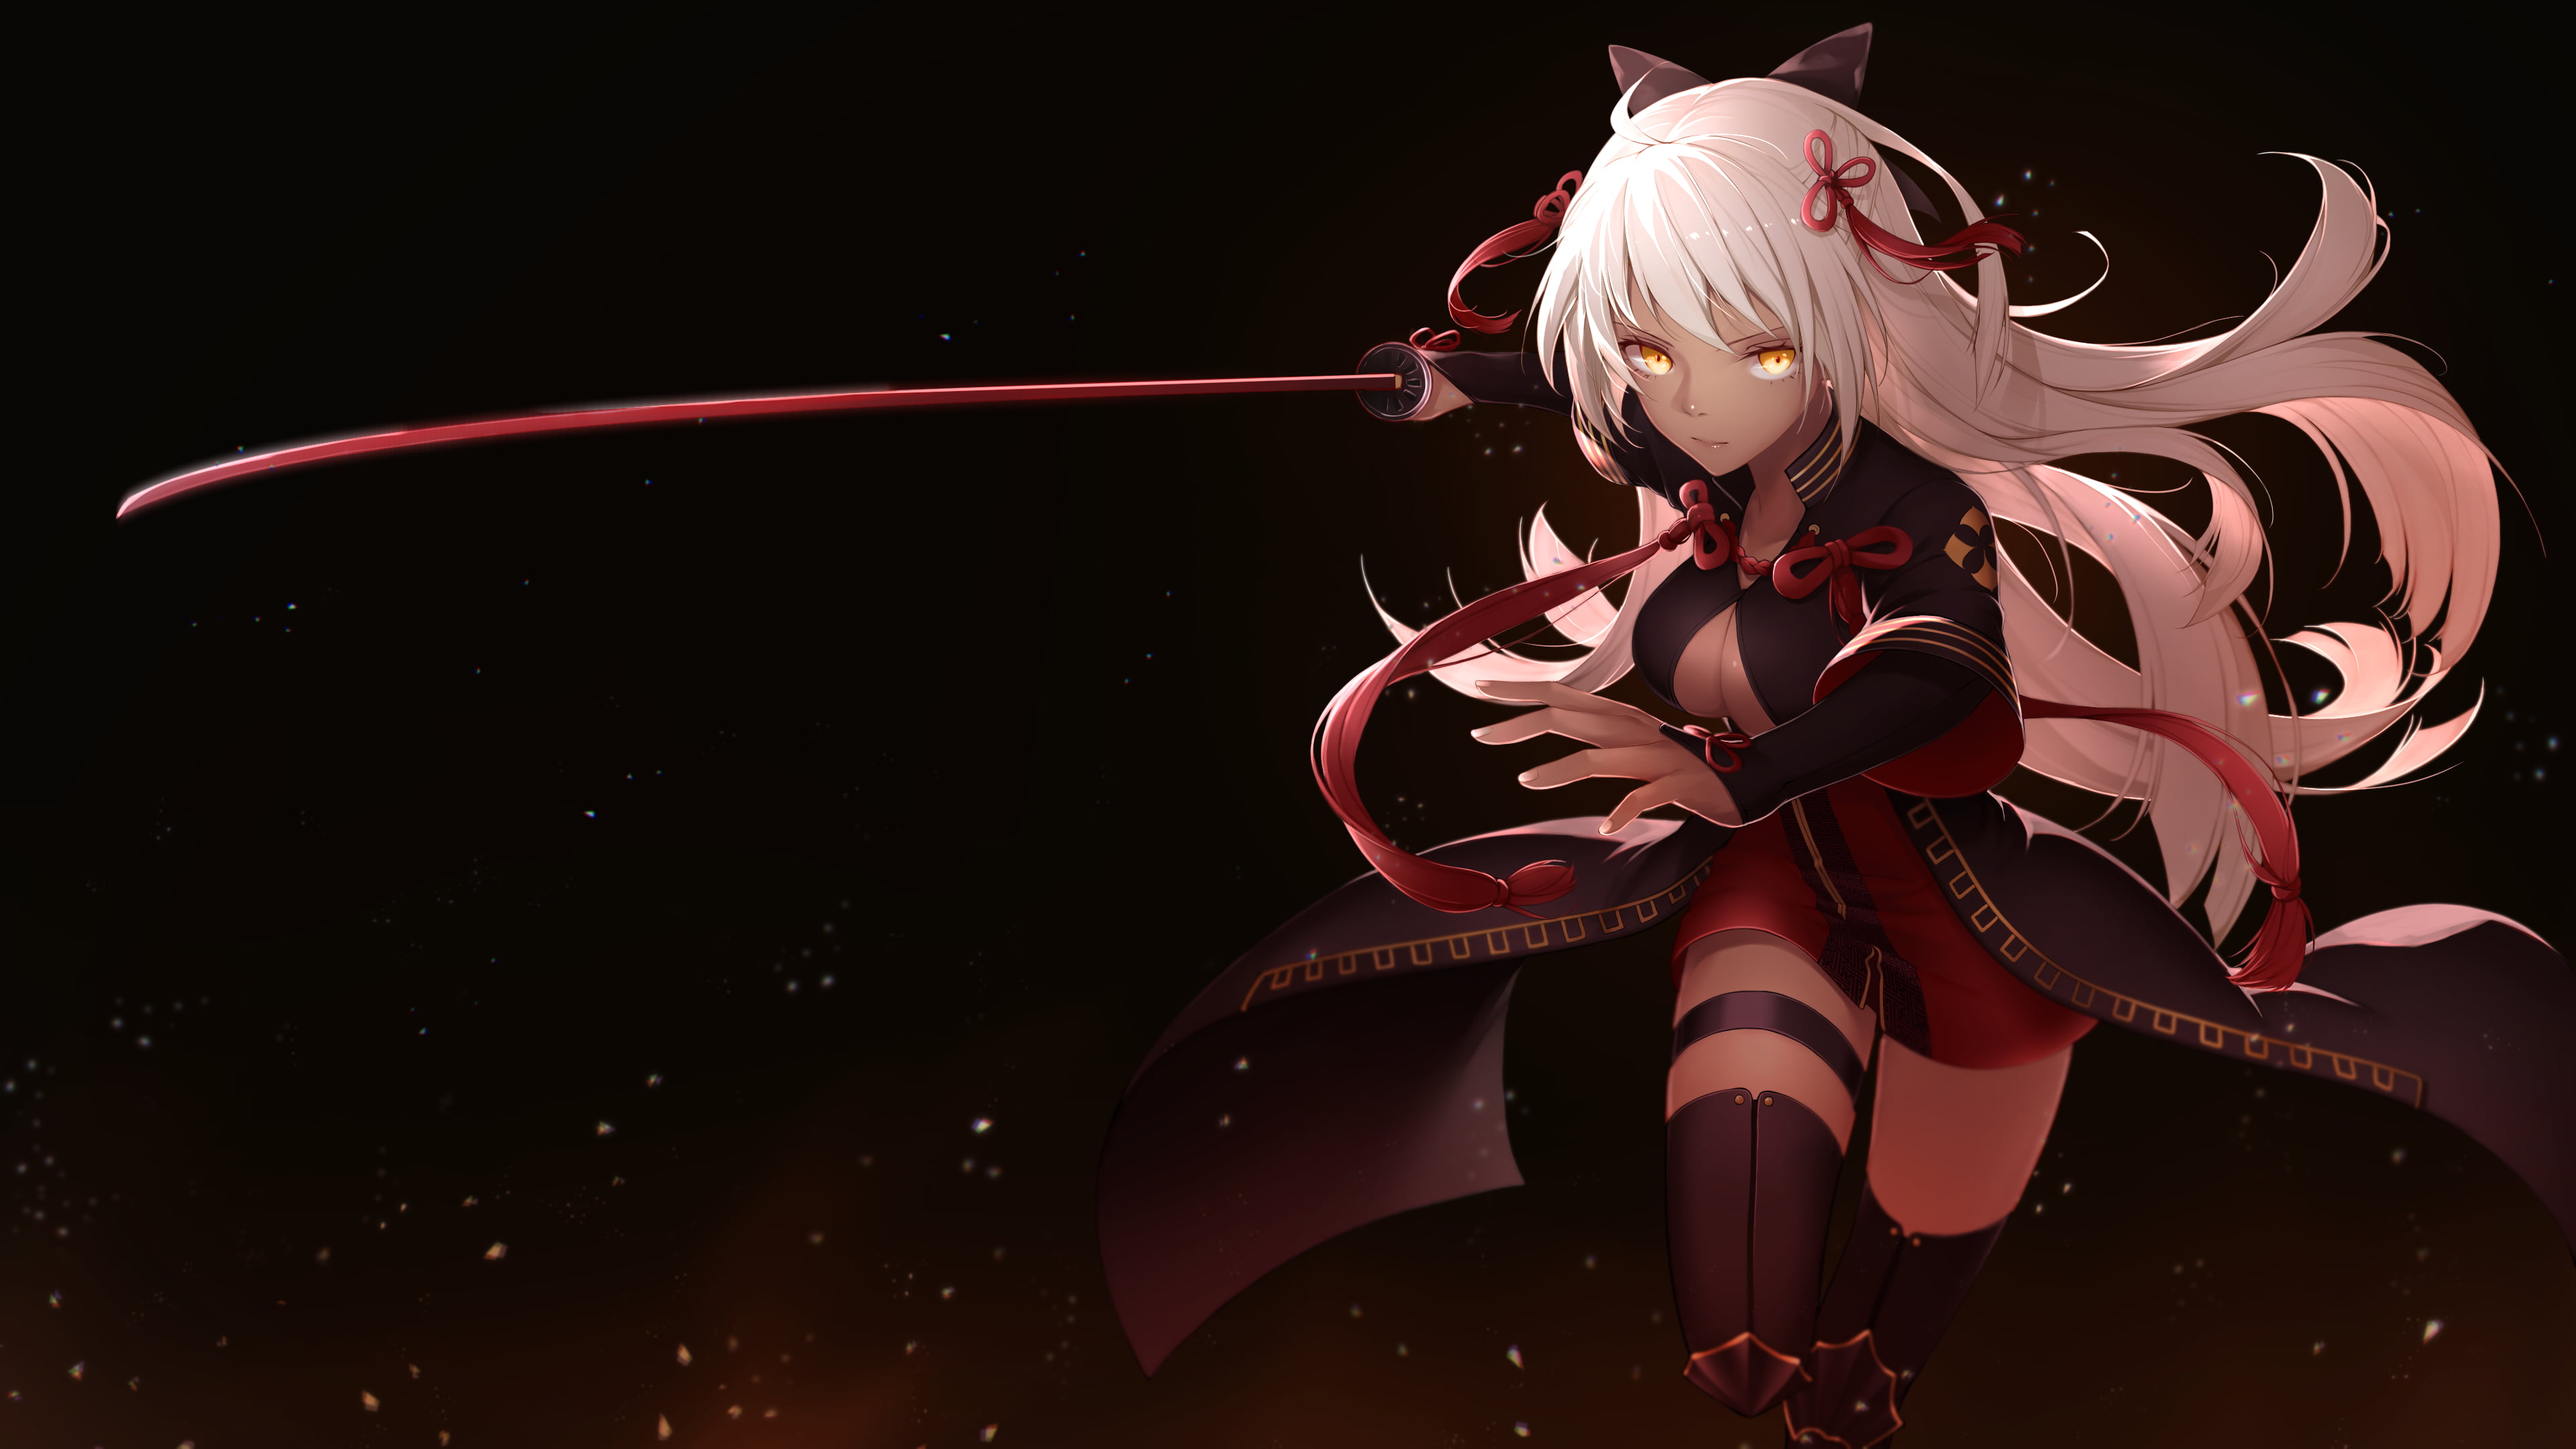 Anime Girl With White Hair And Red Eyes With Sword